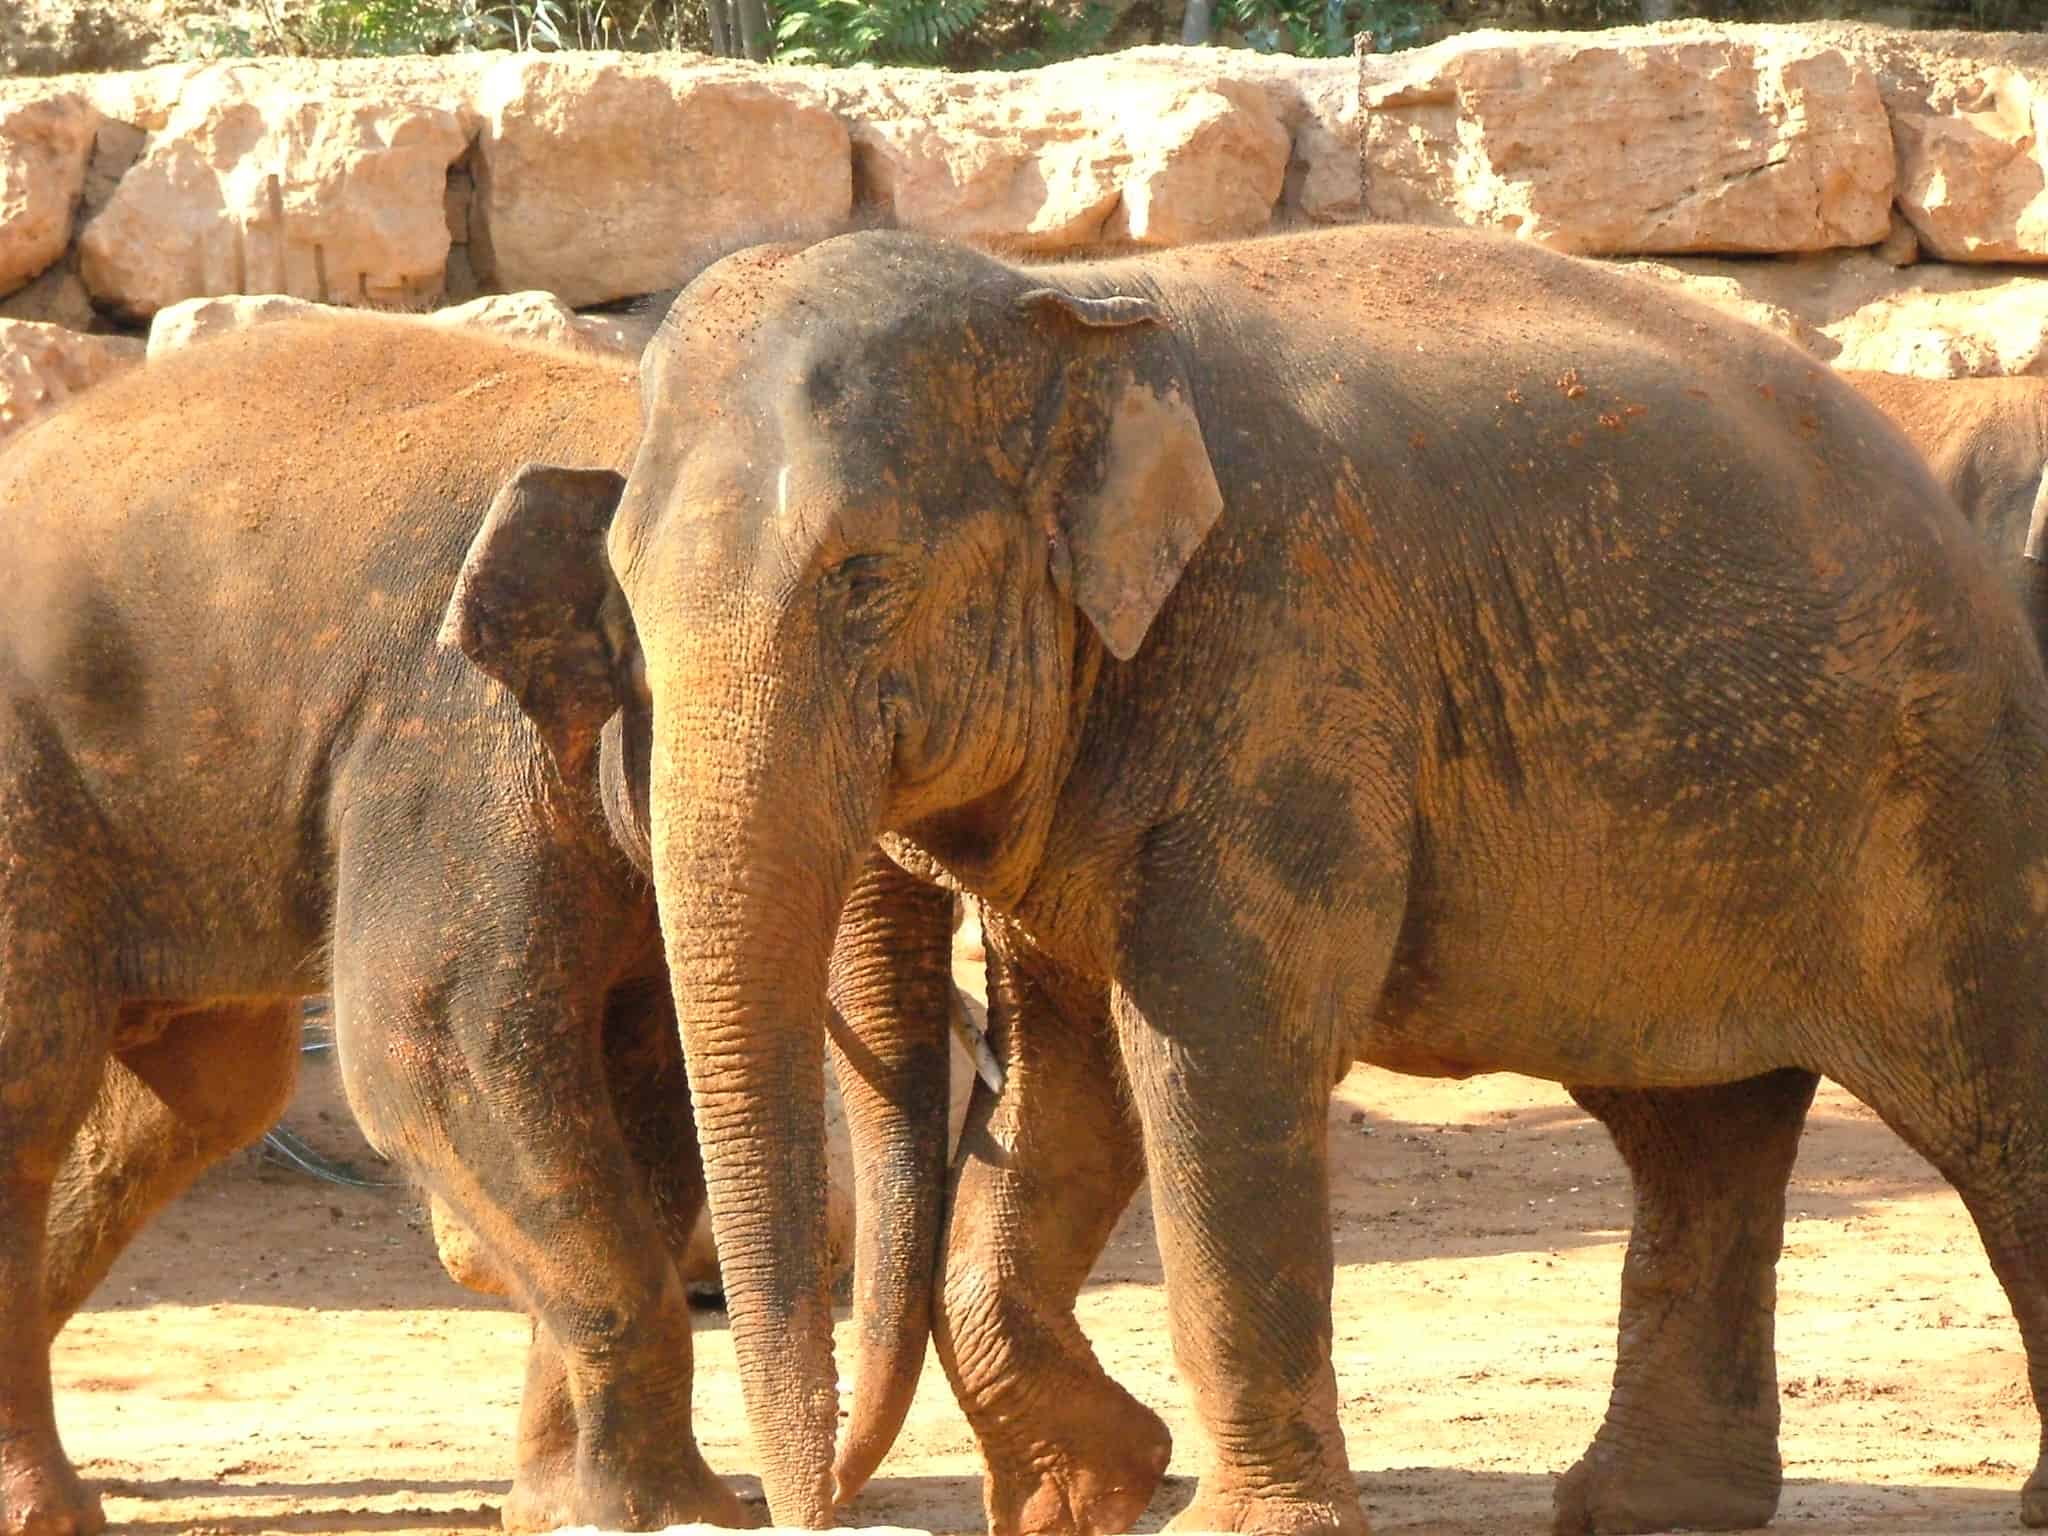 Asian elephants are smaller than African elephants and have slightly lower testosterone levels.